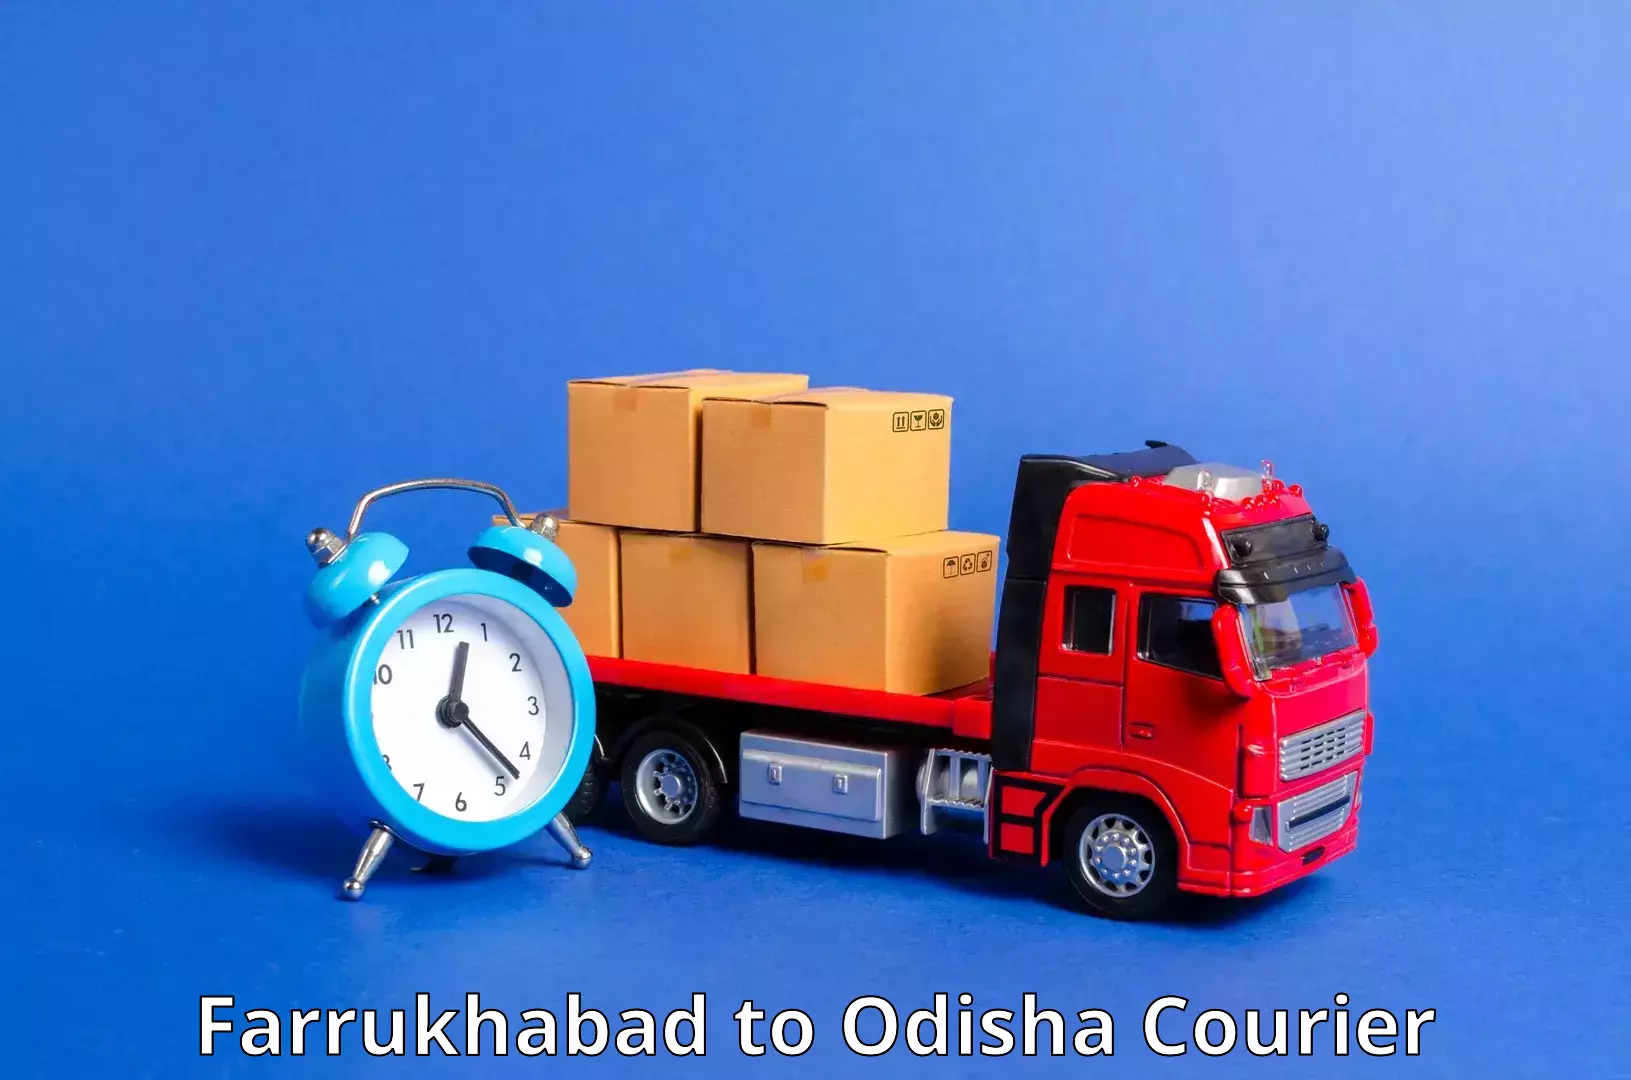 High-capacity parcel service Farrukhabad to Telkoi